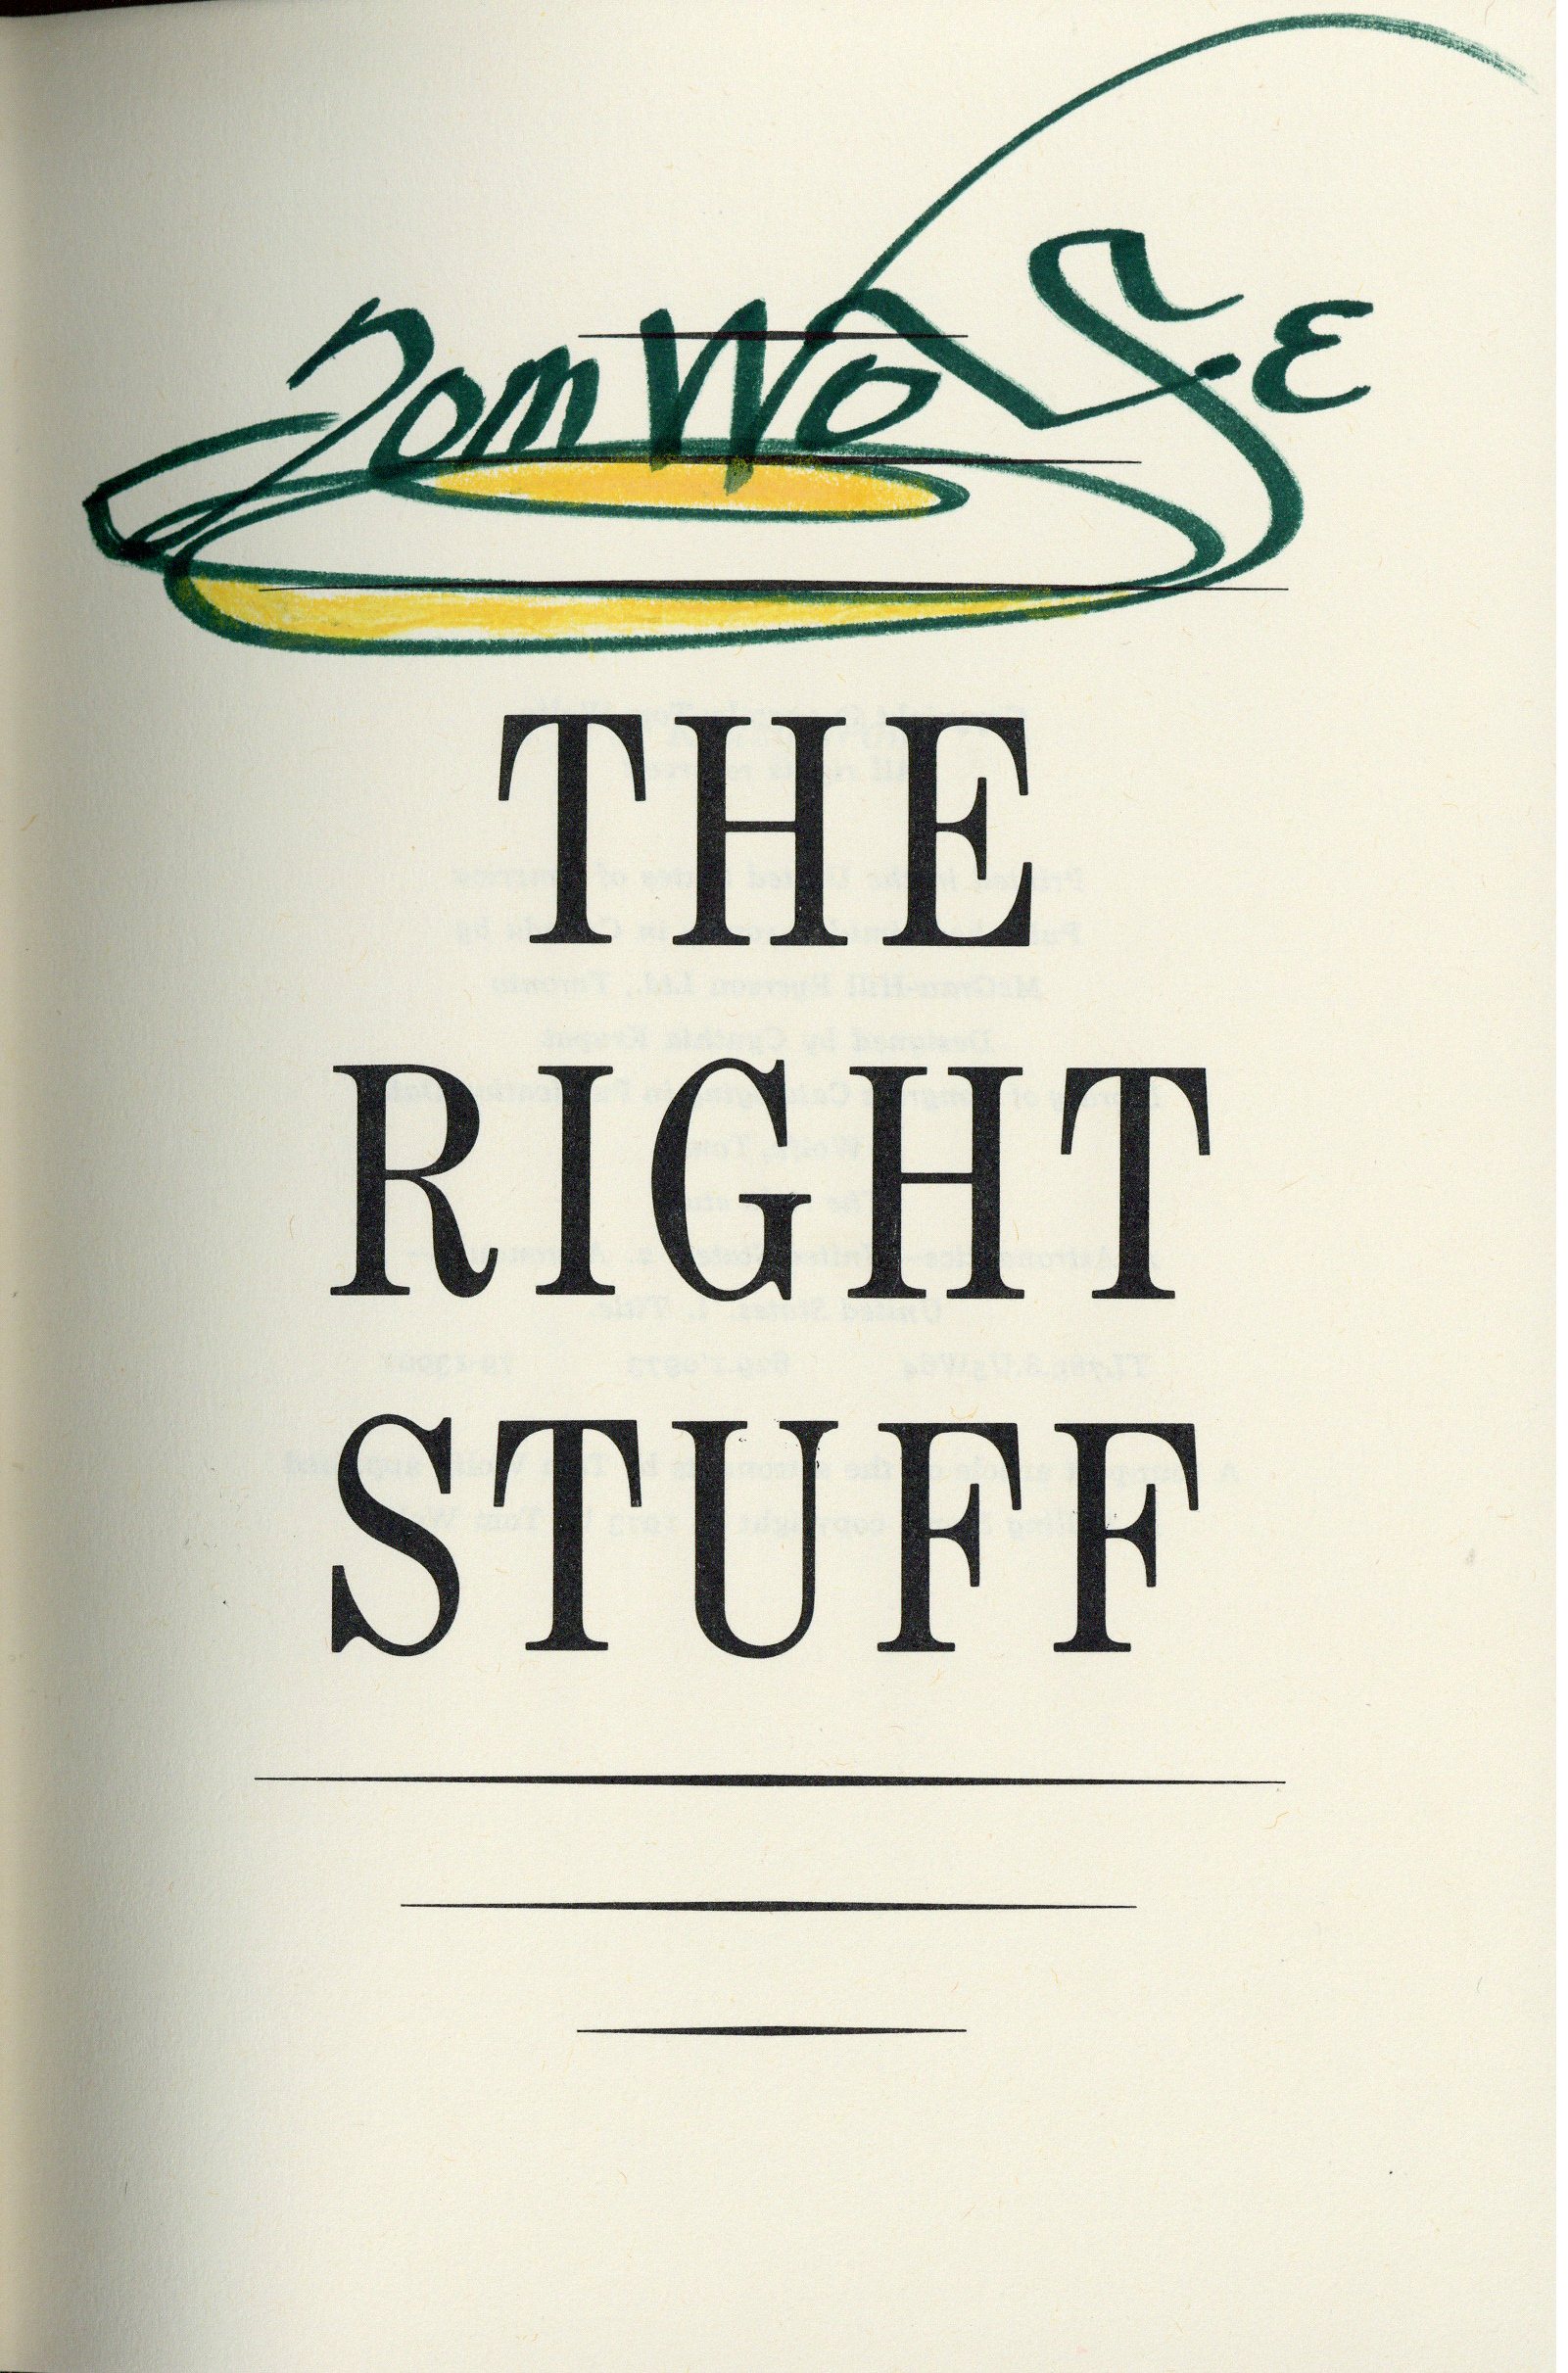 The+Right+Stuff+by+Tom+Wolfe+%281979%29 - The Right Stuff by Tom Wolfe (1979)